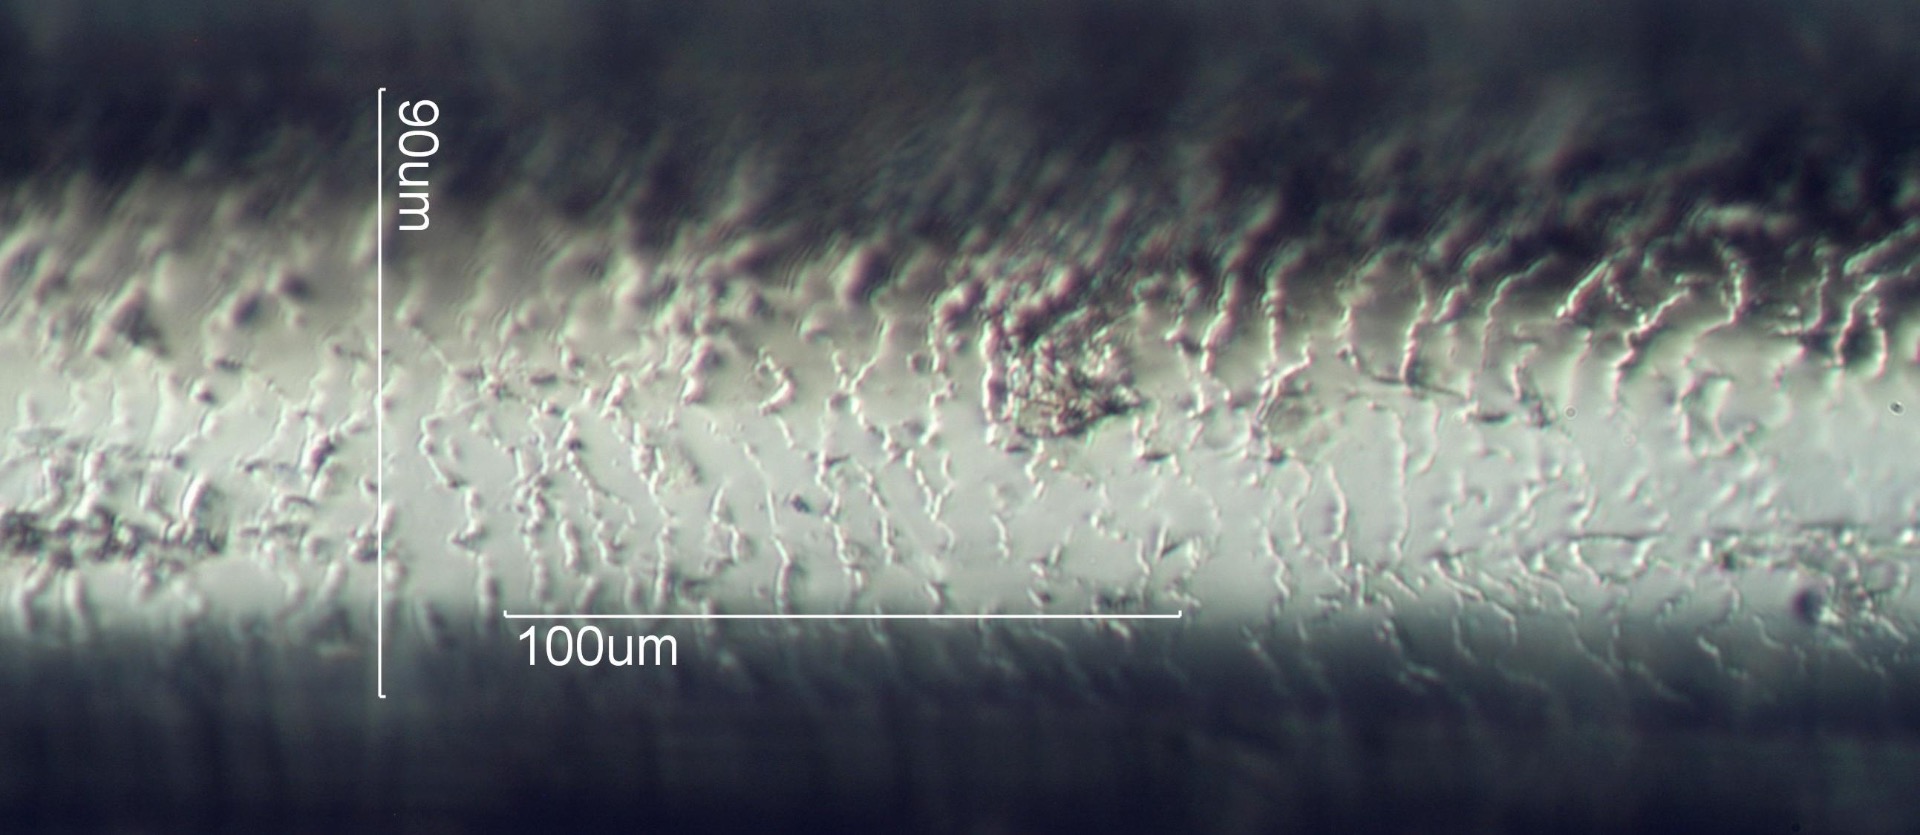 Microscopic image of a horse hair showing the scale-like edge